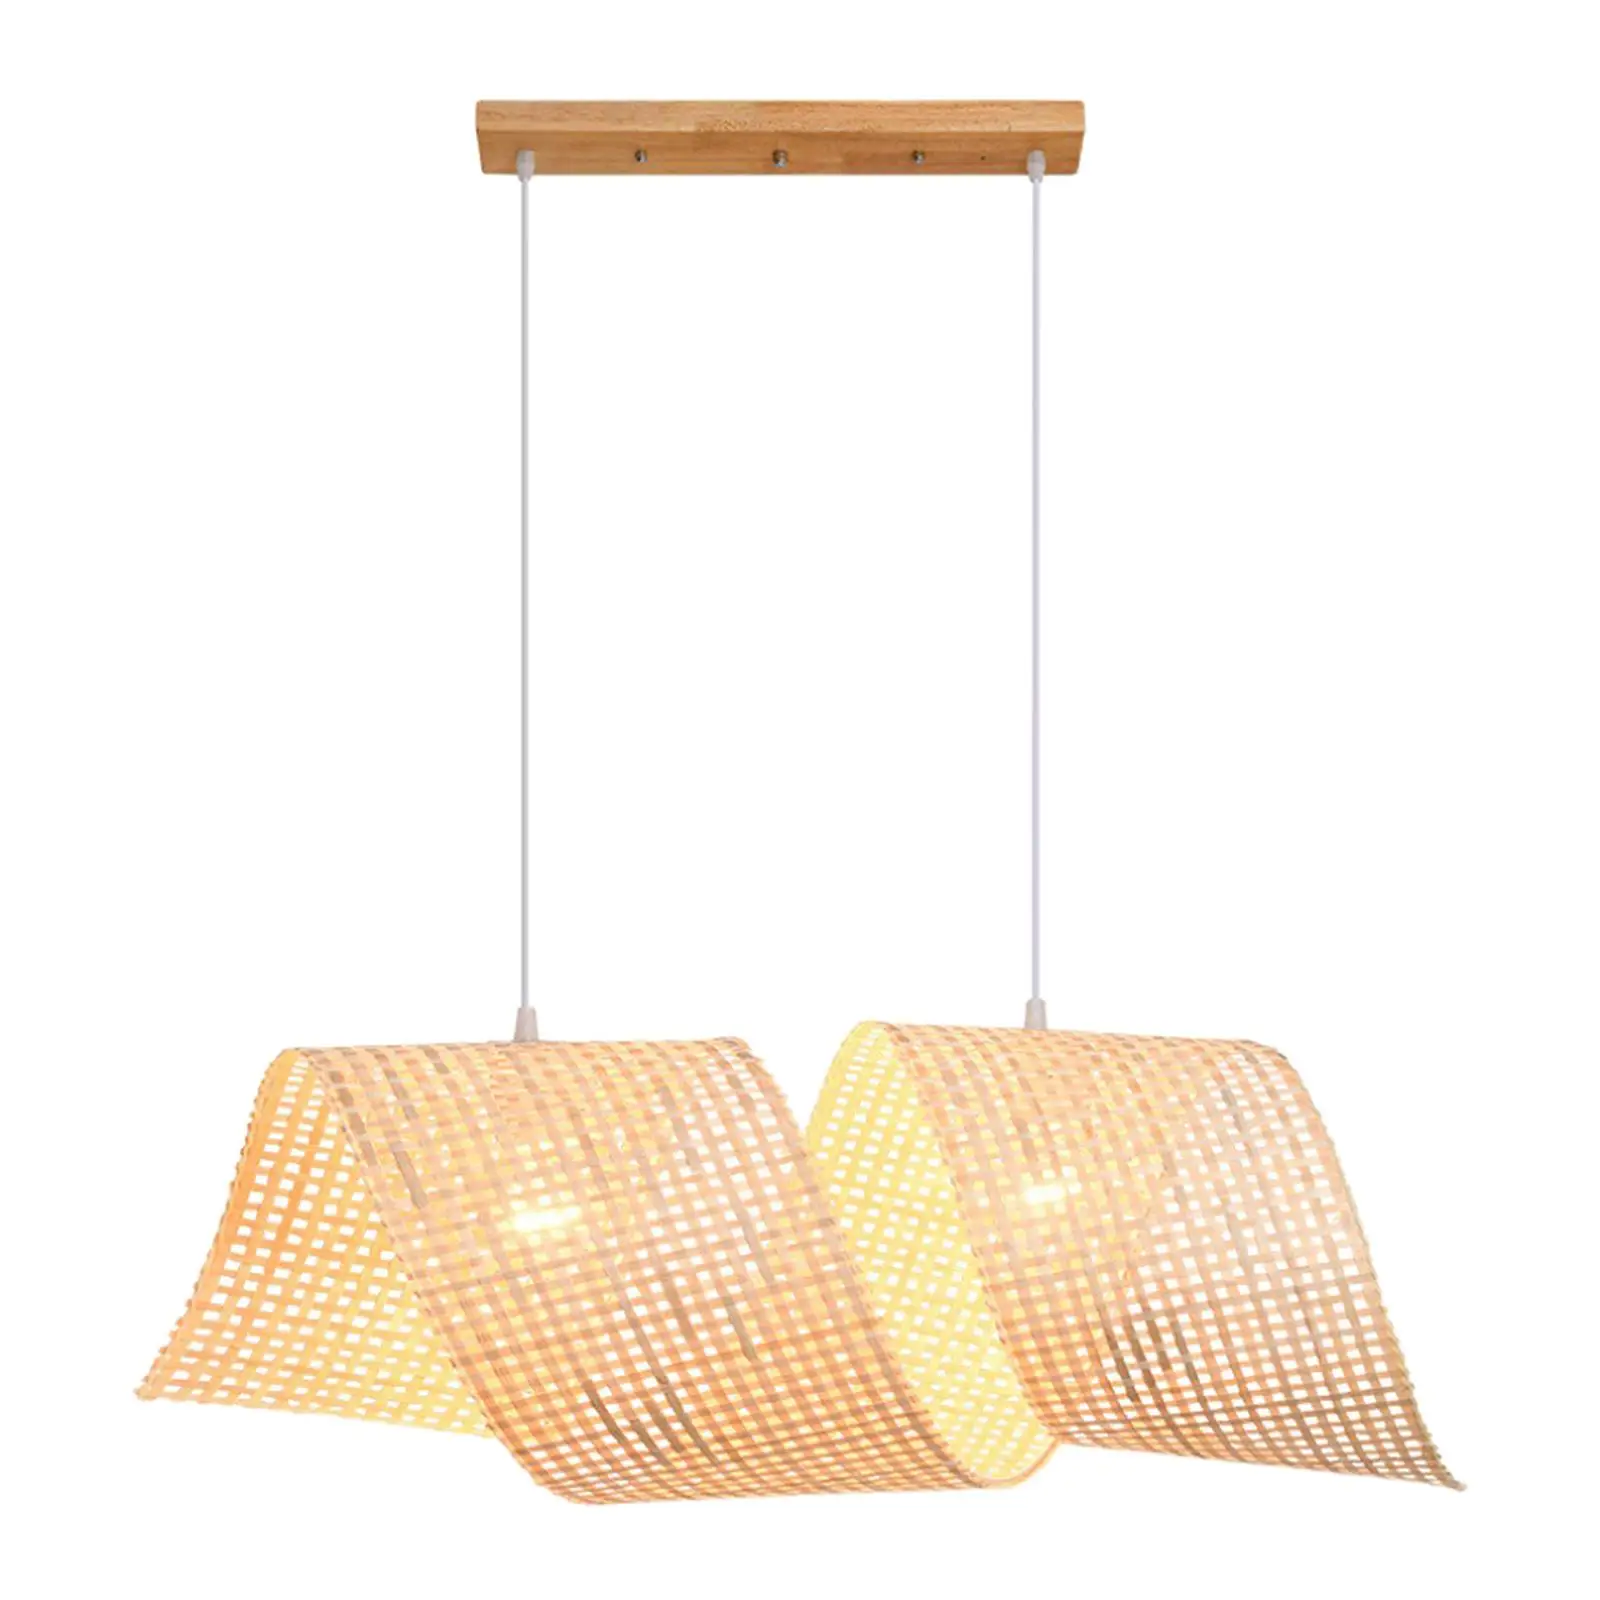 

Bamboo Pendant Light Fixture Ceiling Lighting Fixture Bamboo Wicker Lamp Shade for Dining Room Teahouse Farmhouse Cafe Bar